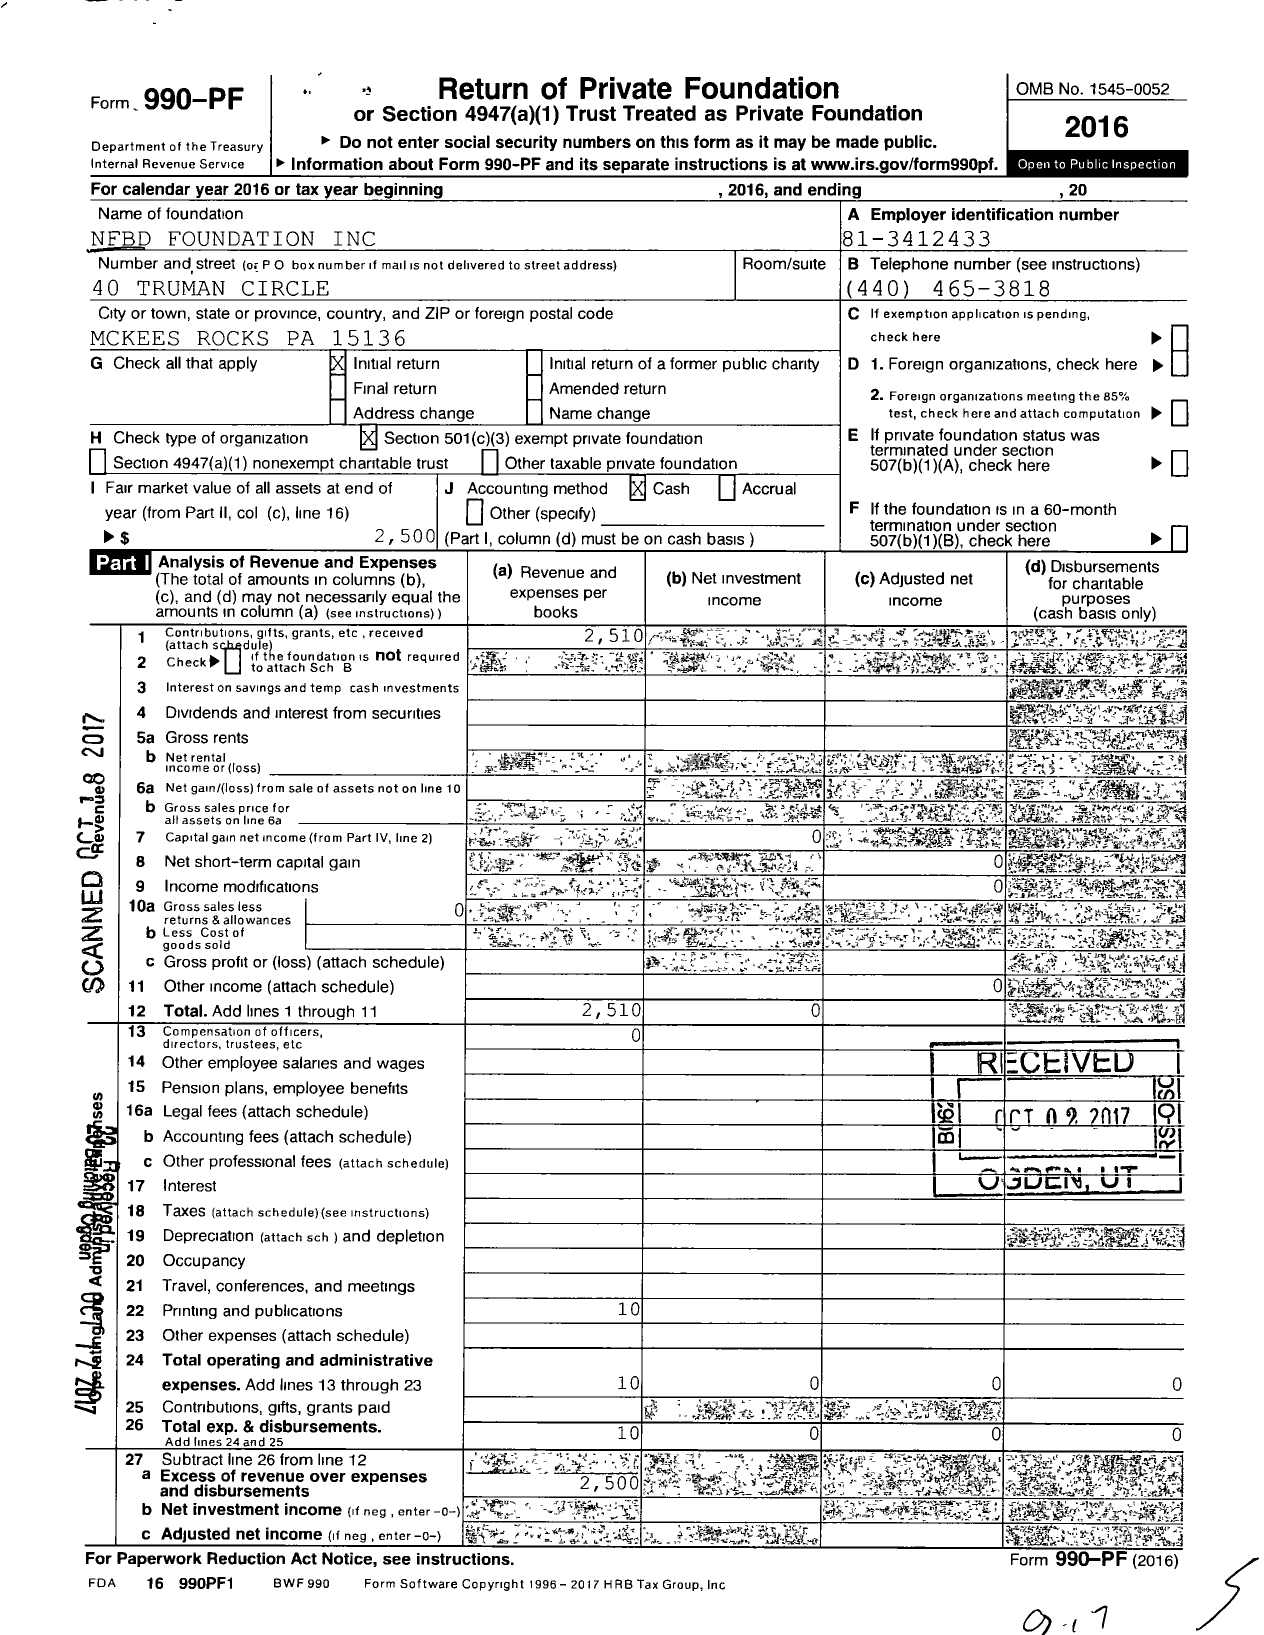 Image of first page of 2016 Form 990PF for NFBD Foundation